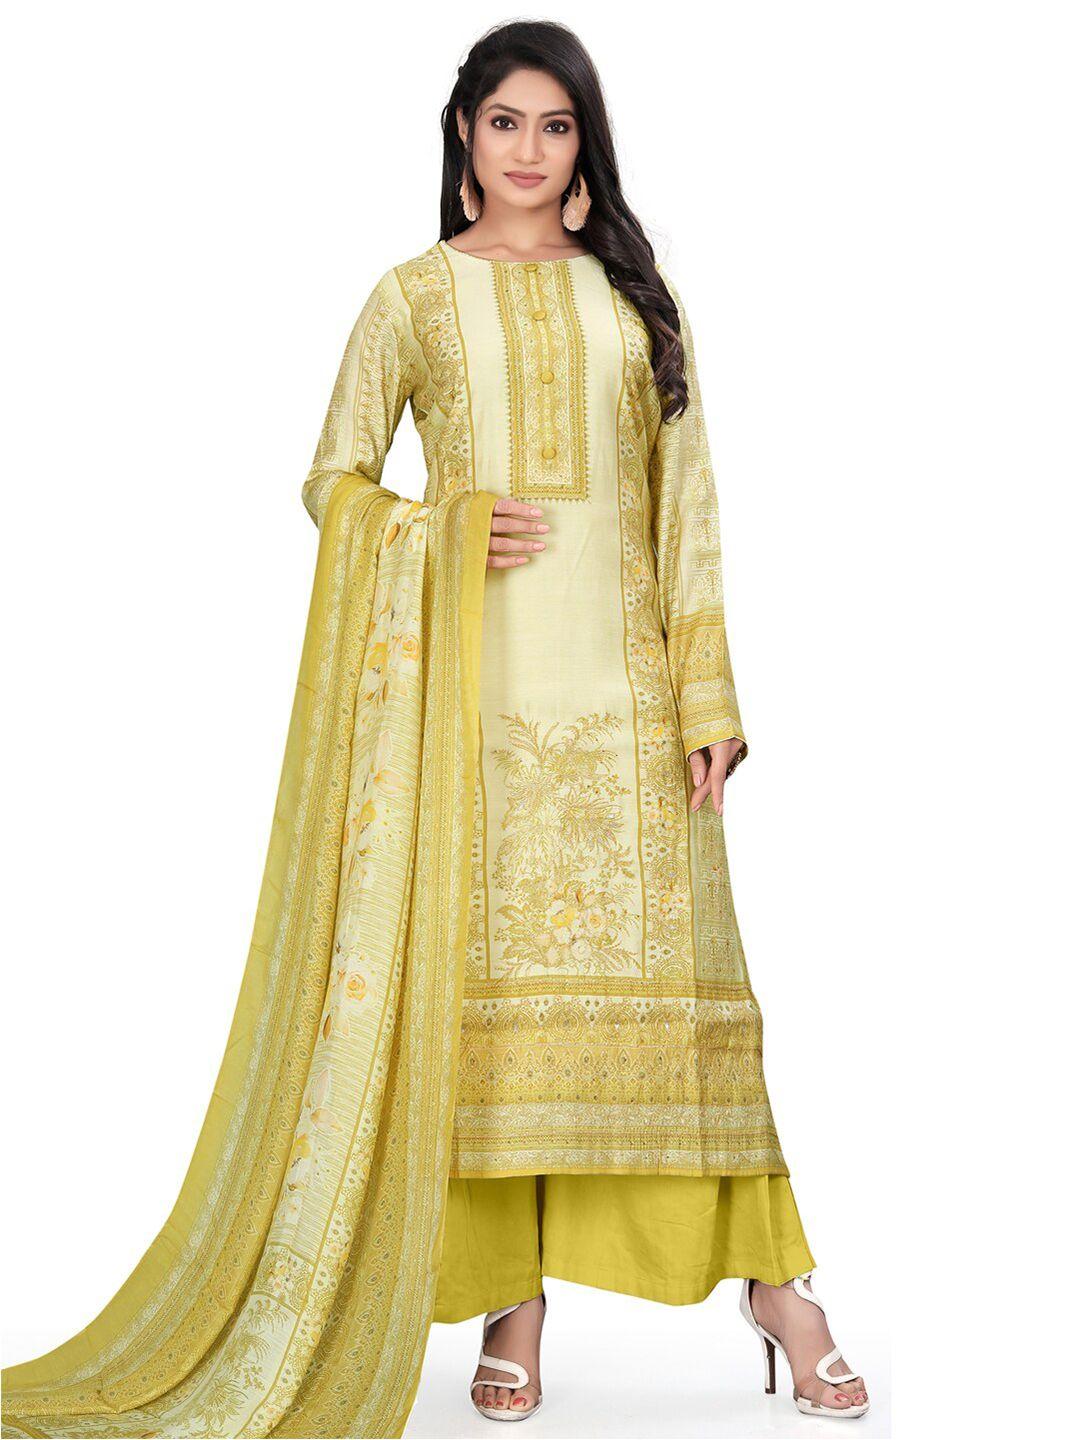 Stylee LIFESTYLE Ethnic Motifs Printed Pure Silk Unstitched Dress Material